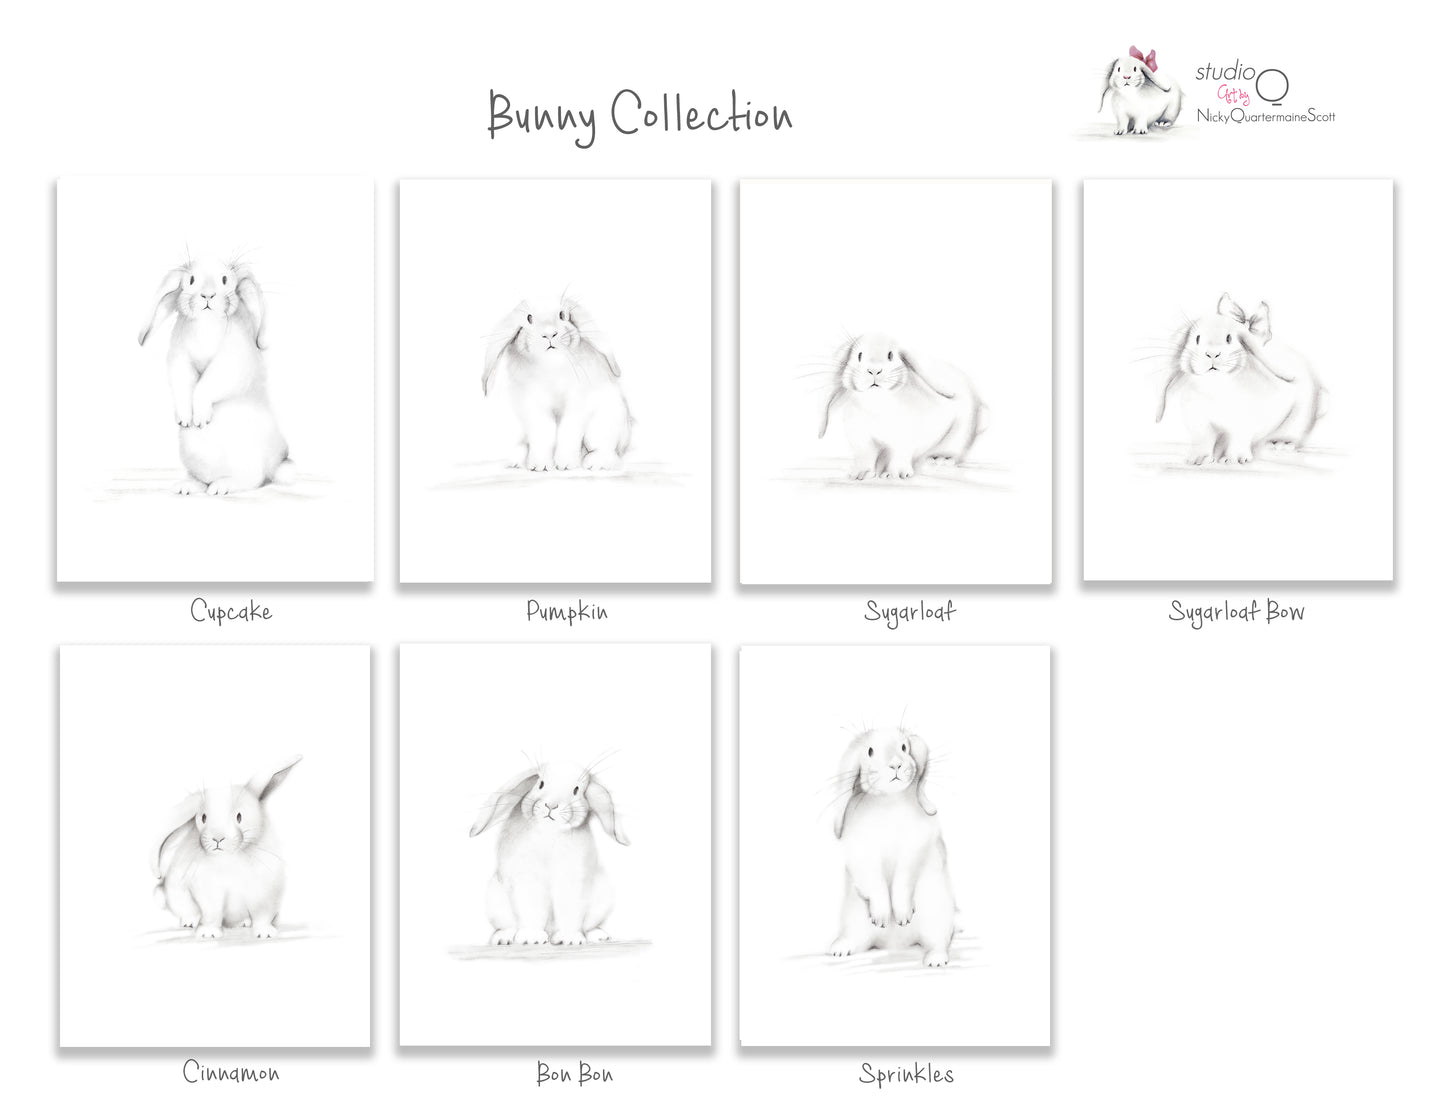 Choose your set of 3 bunny sketch prints from a set of 6 in the Bunny Collection - Studio Q - Art by Nicky Quartermaine Scott